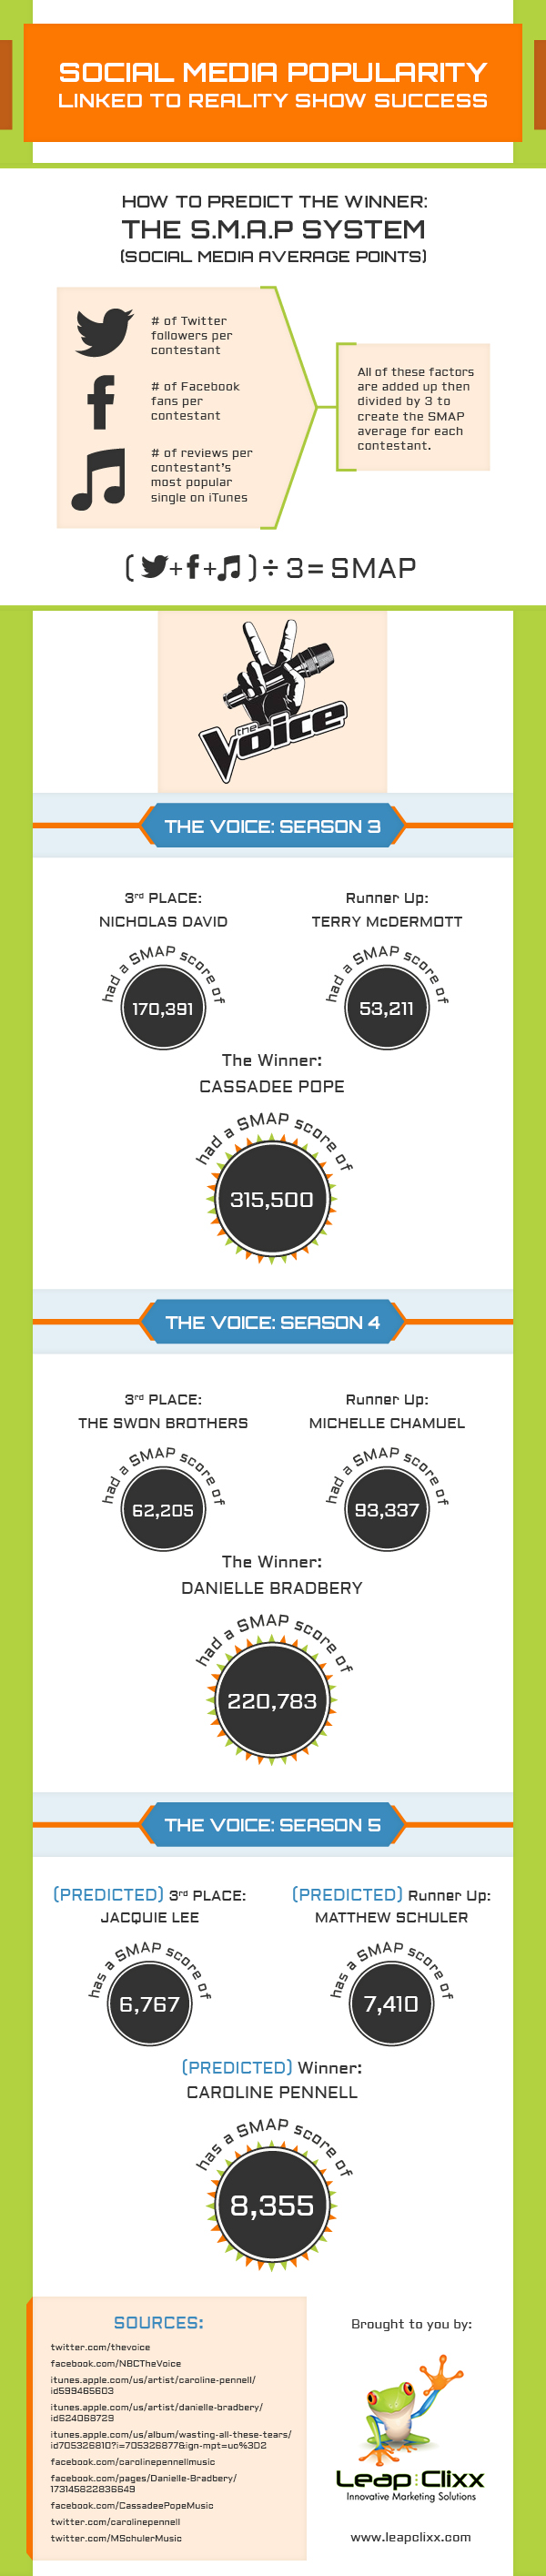 The Voice Infographic